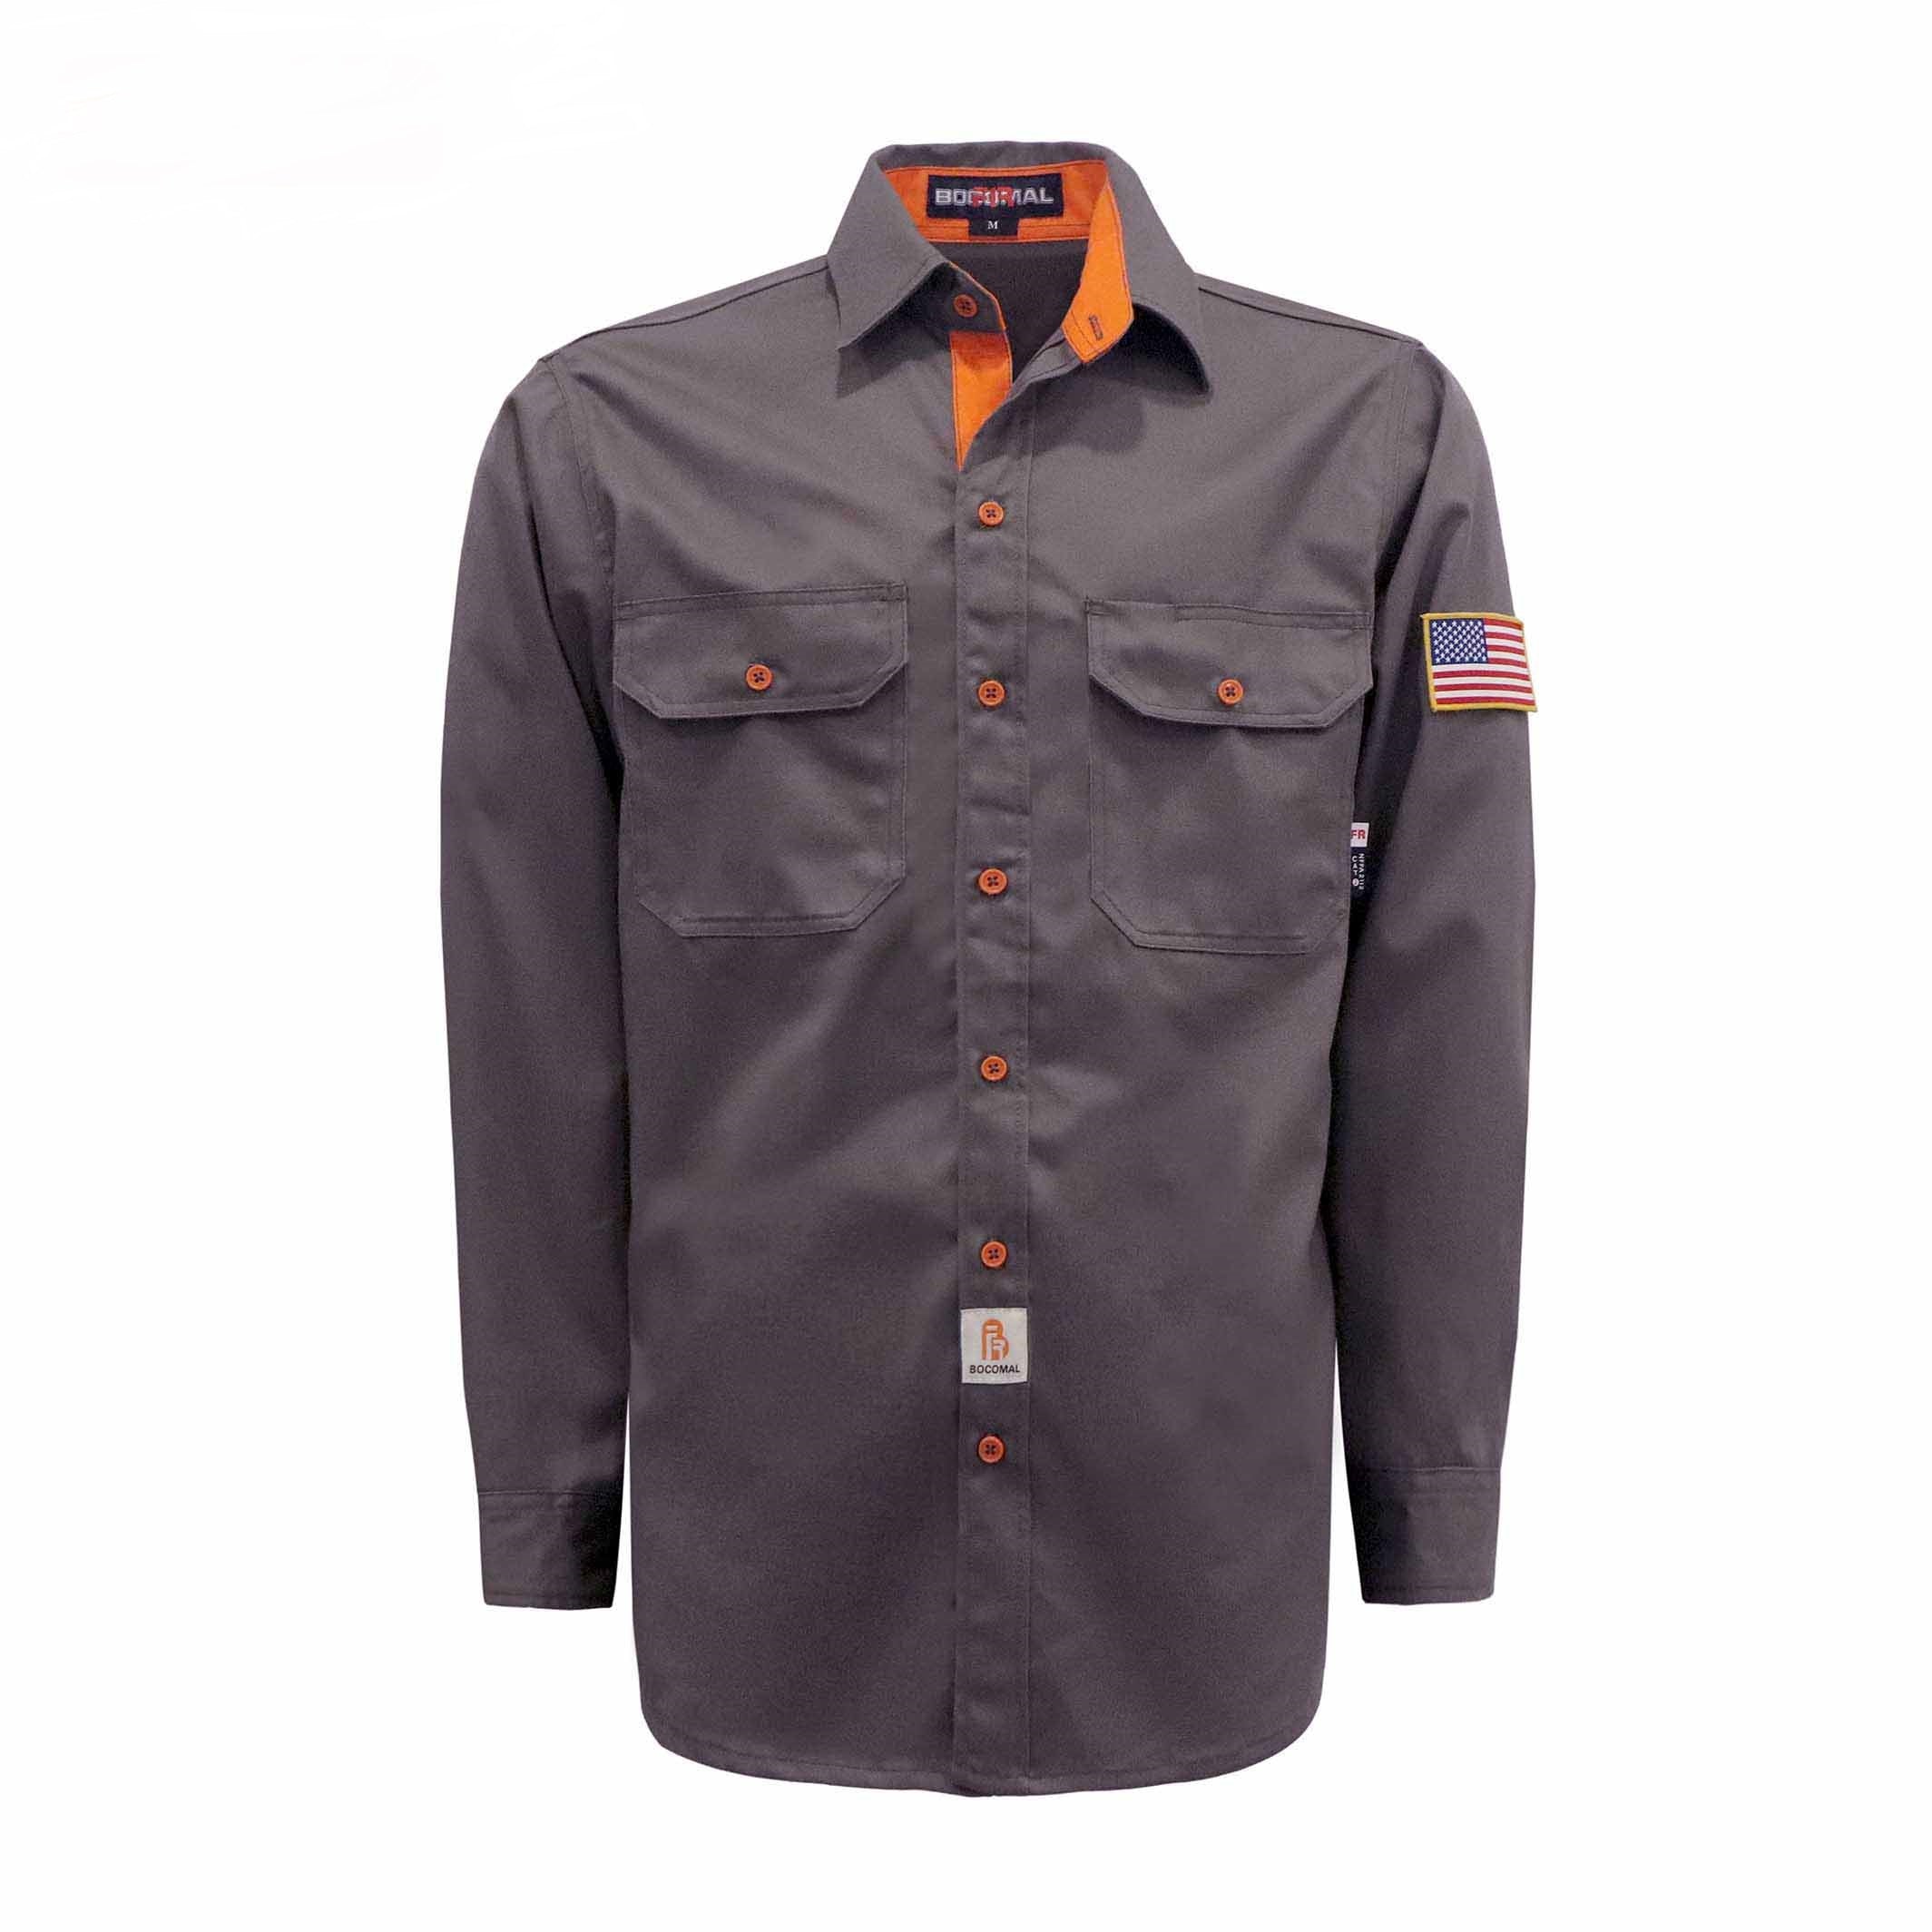 Custom Embroidery Men's Long Sleeve Industrial Work Shirt with Name  Embroidery and American Flag Patch